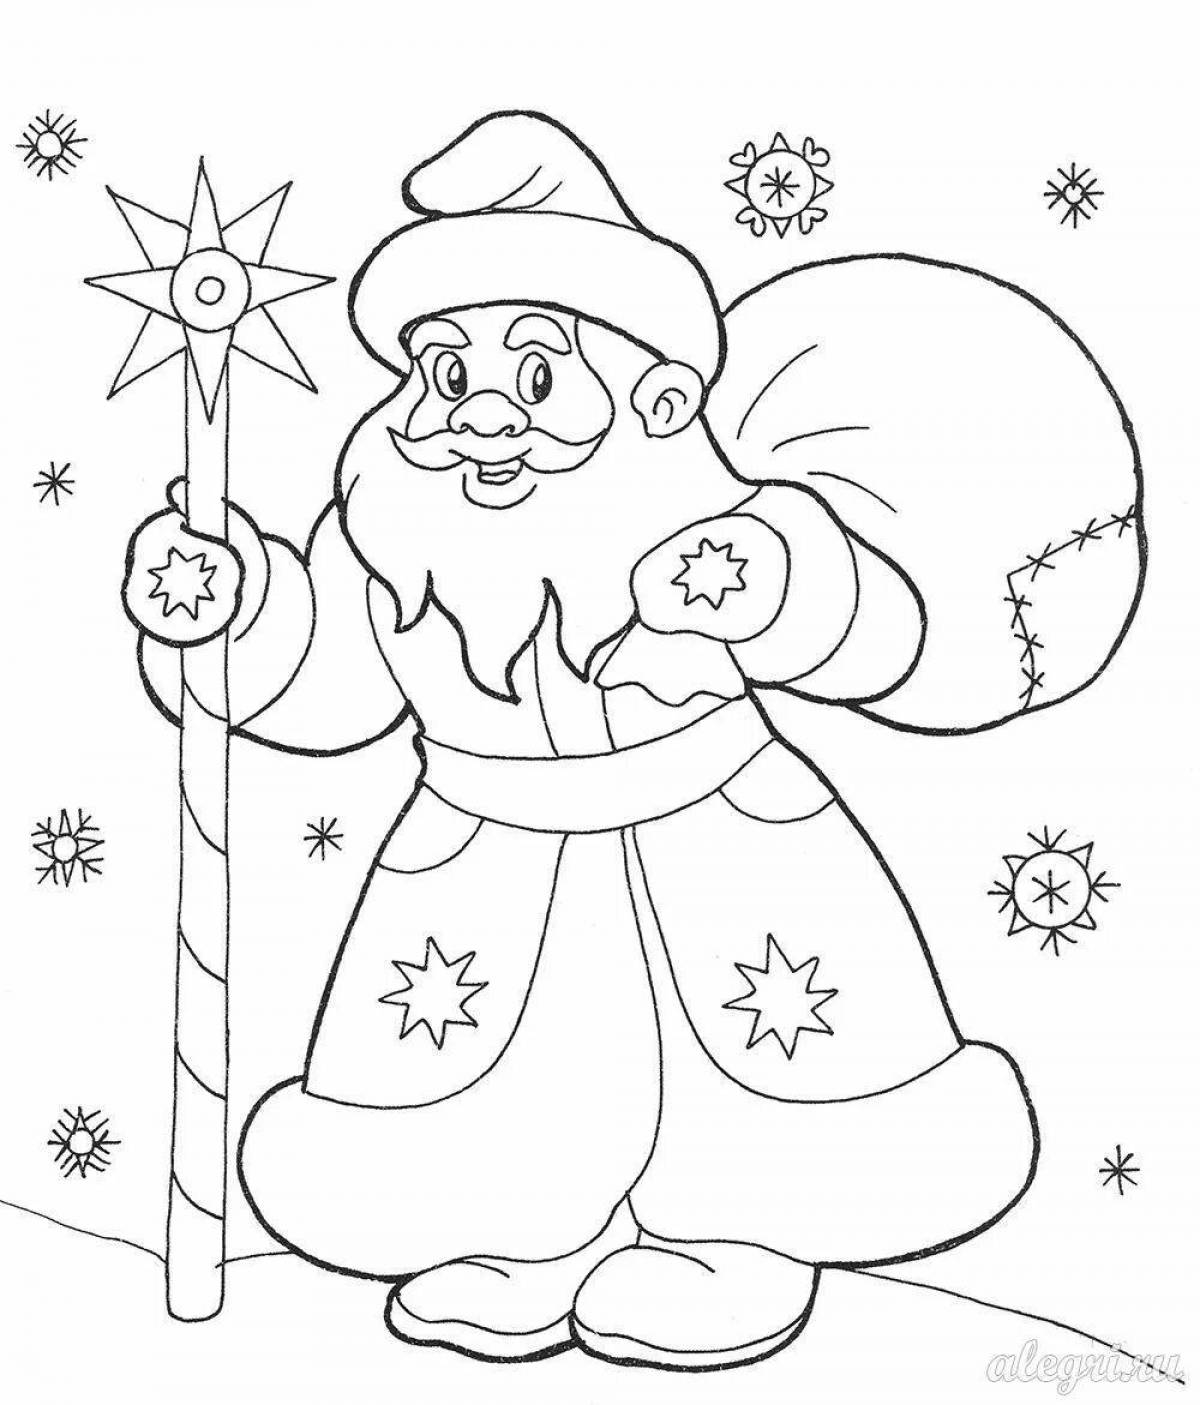 Gorgeous children's Christmas coloring book